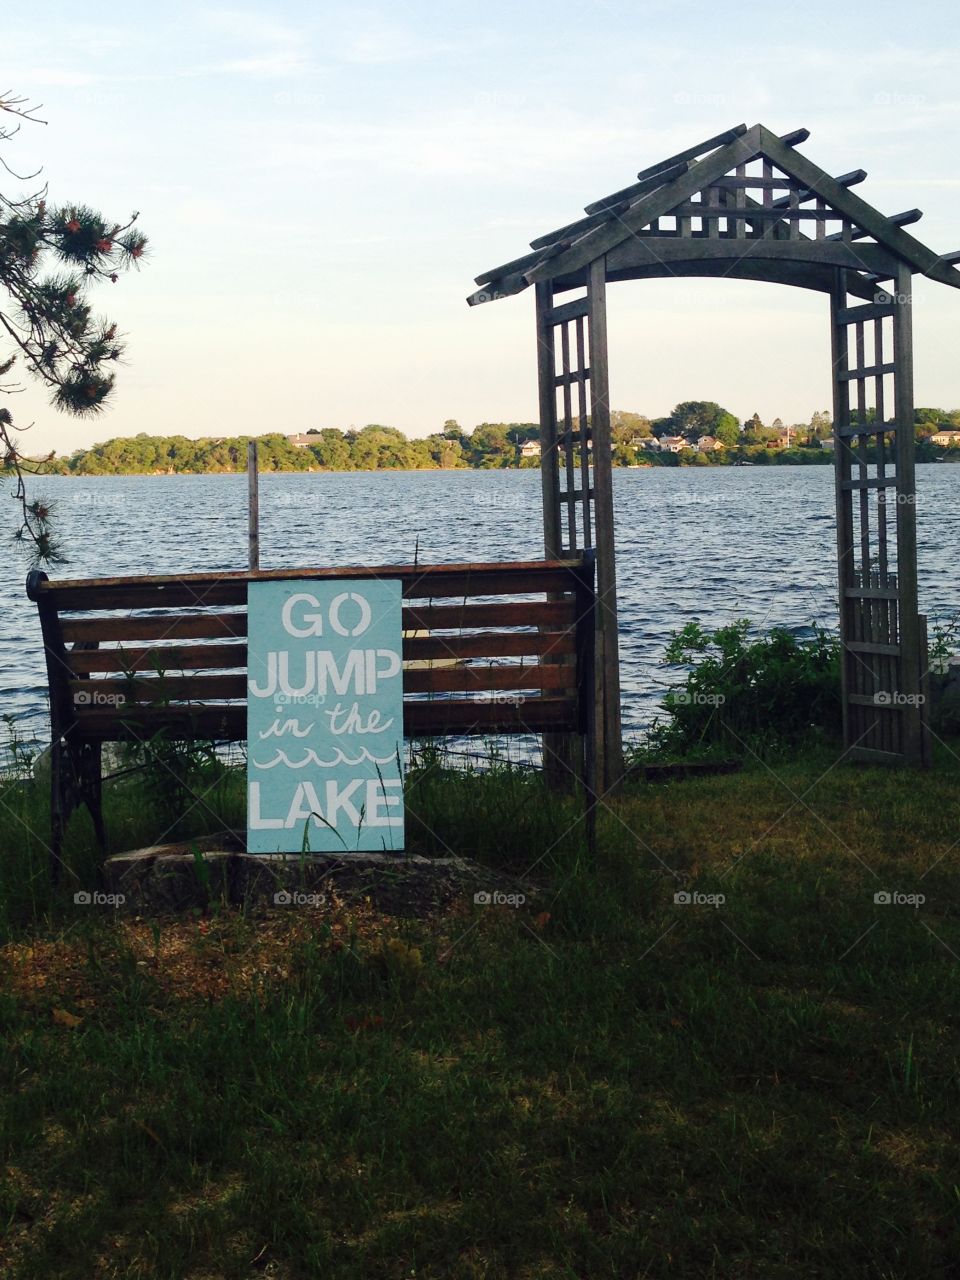 Go jump in the lake 